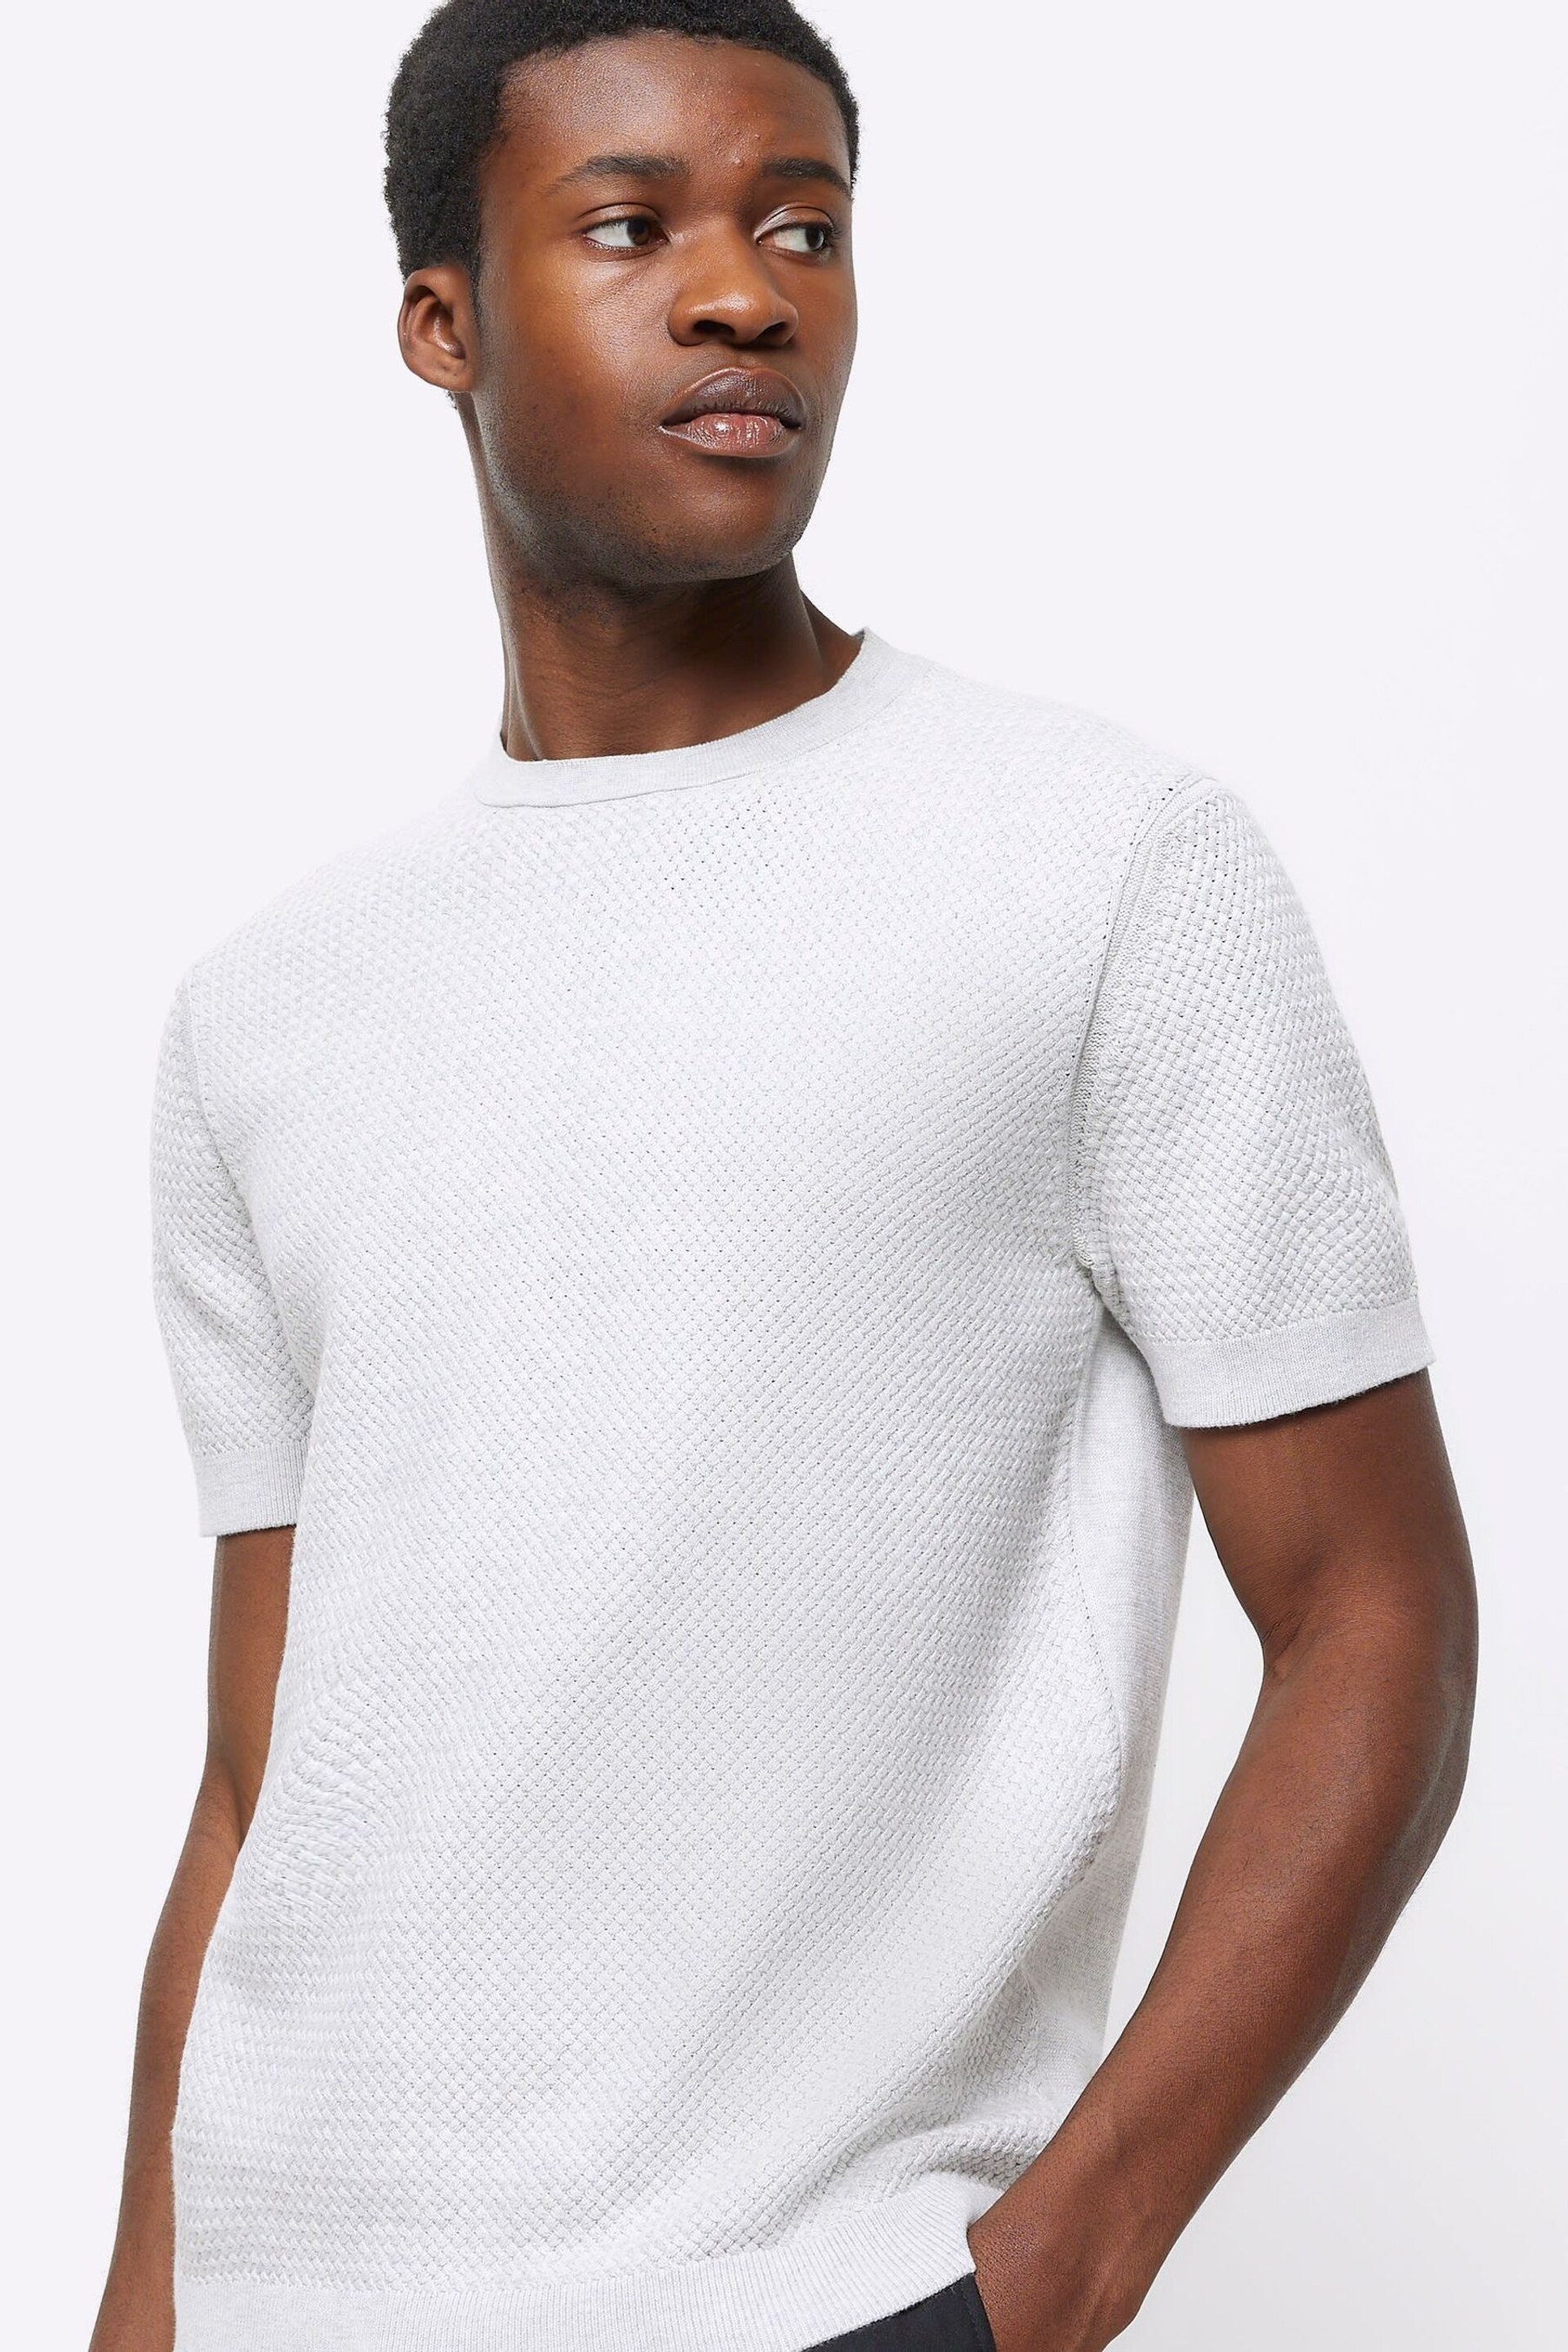 River Island Grey Textured Knitted T-Shirt - Image 3 of 4